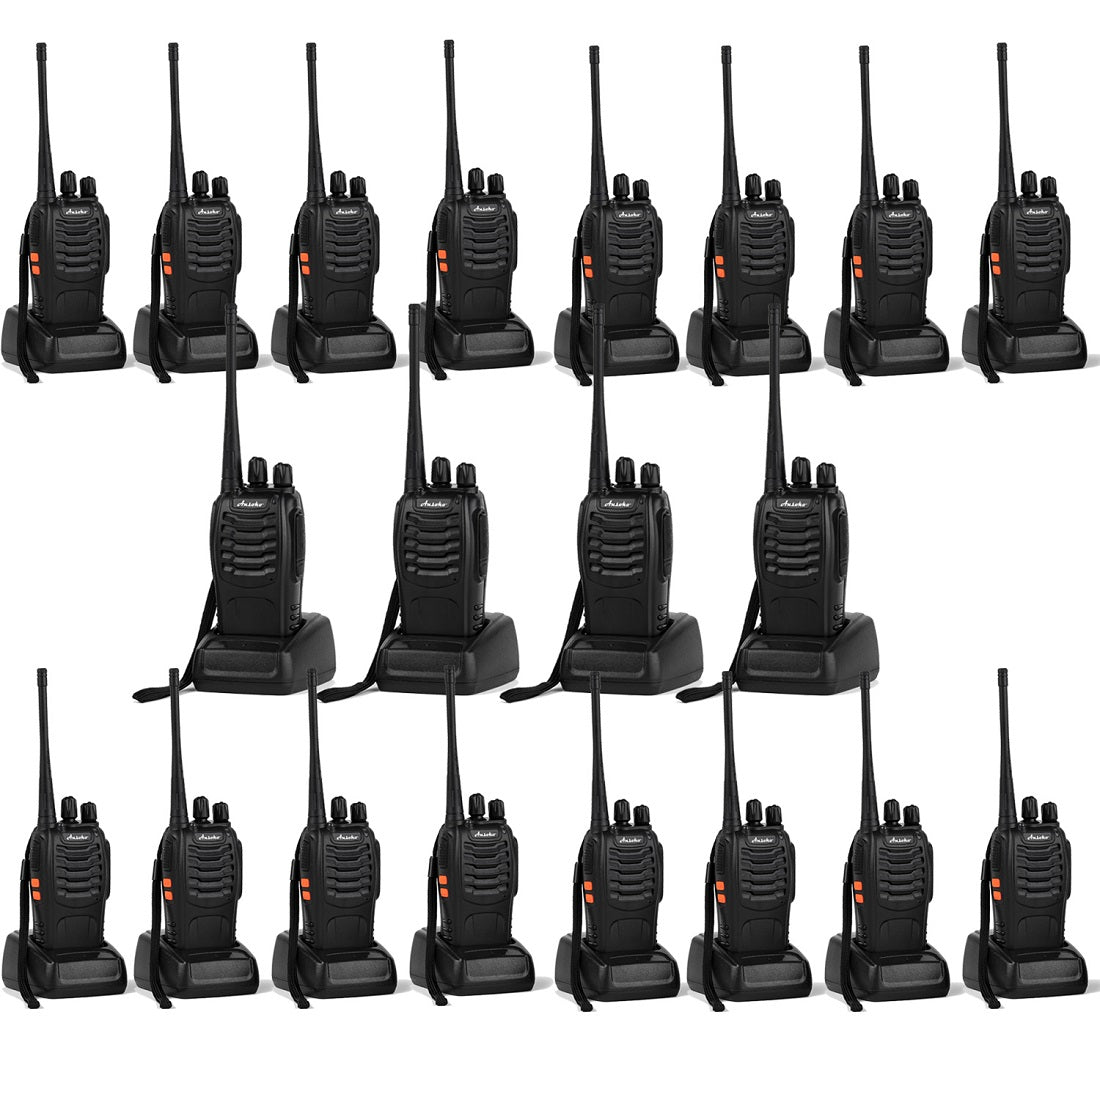 20 black color 2alkie talkies on charger bases